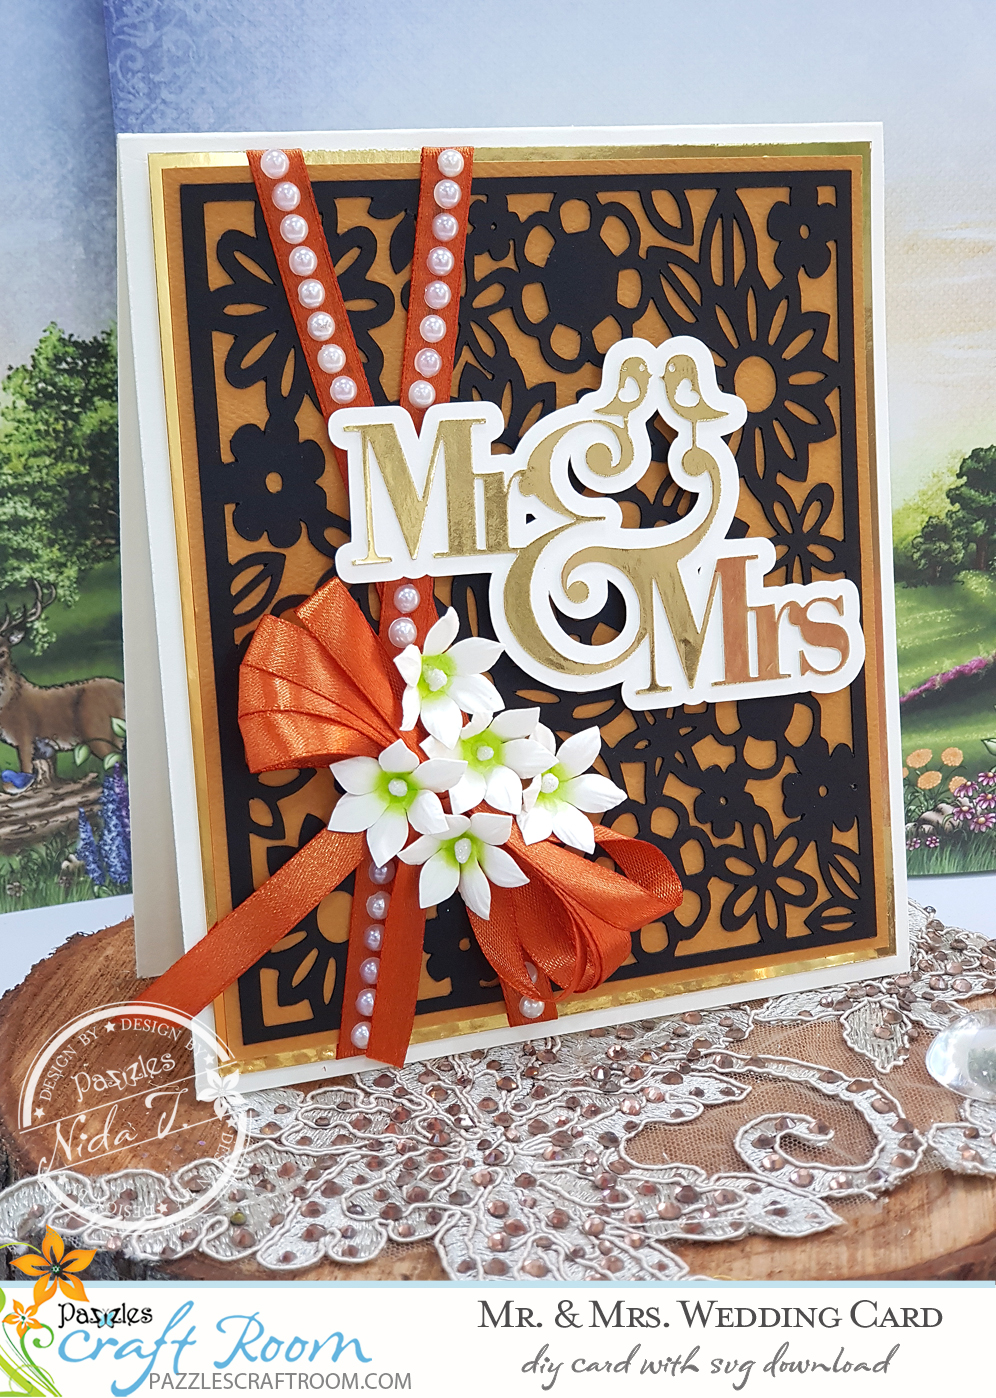 Pazzles Mr and Mrs DIY Wedding Card with instant SVG download. Compatible with all major electronic cutters including Pazzles Inspiration, Cricut, and Silhouette Cameo. Design by Nida Tanweer.